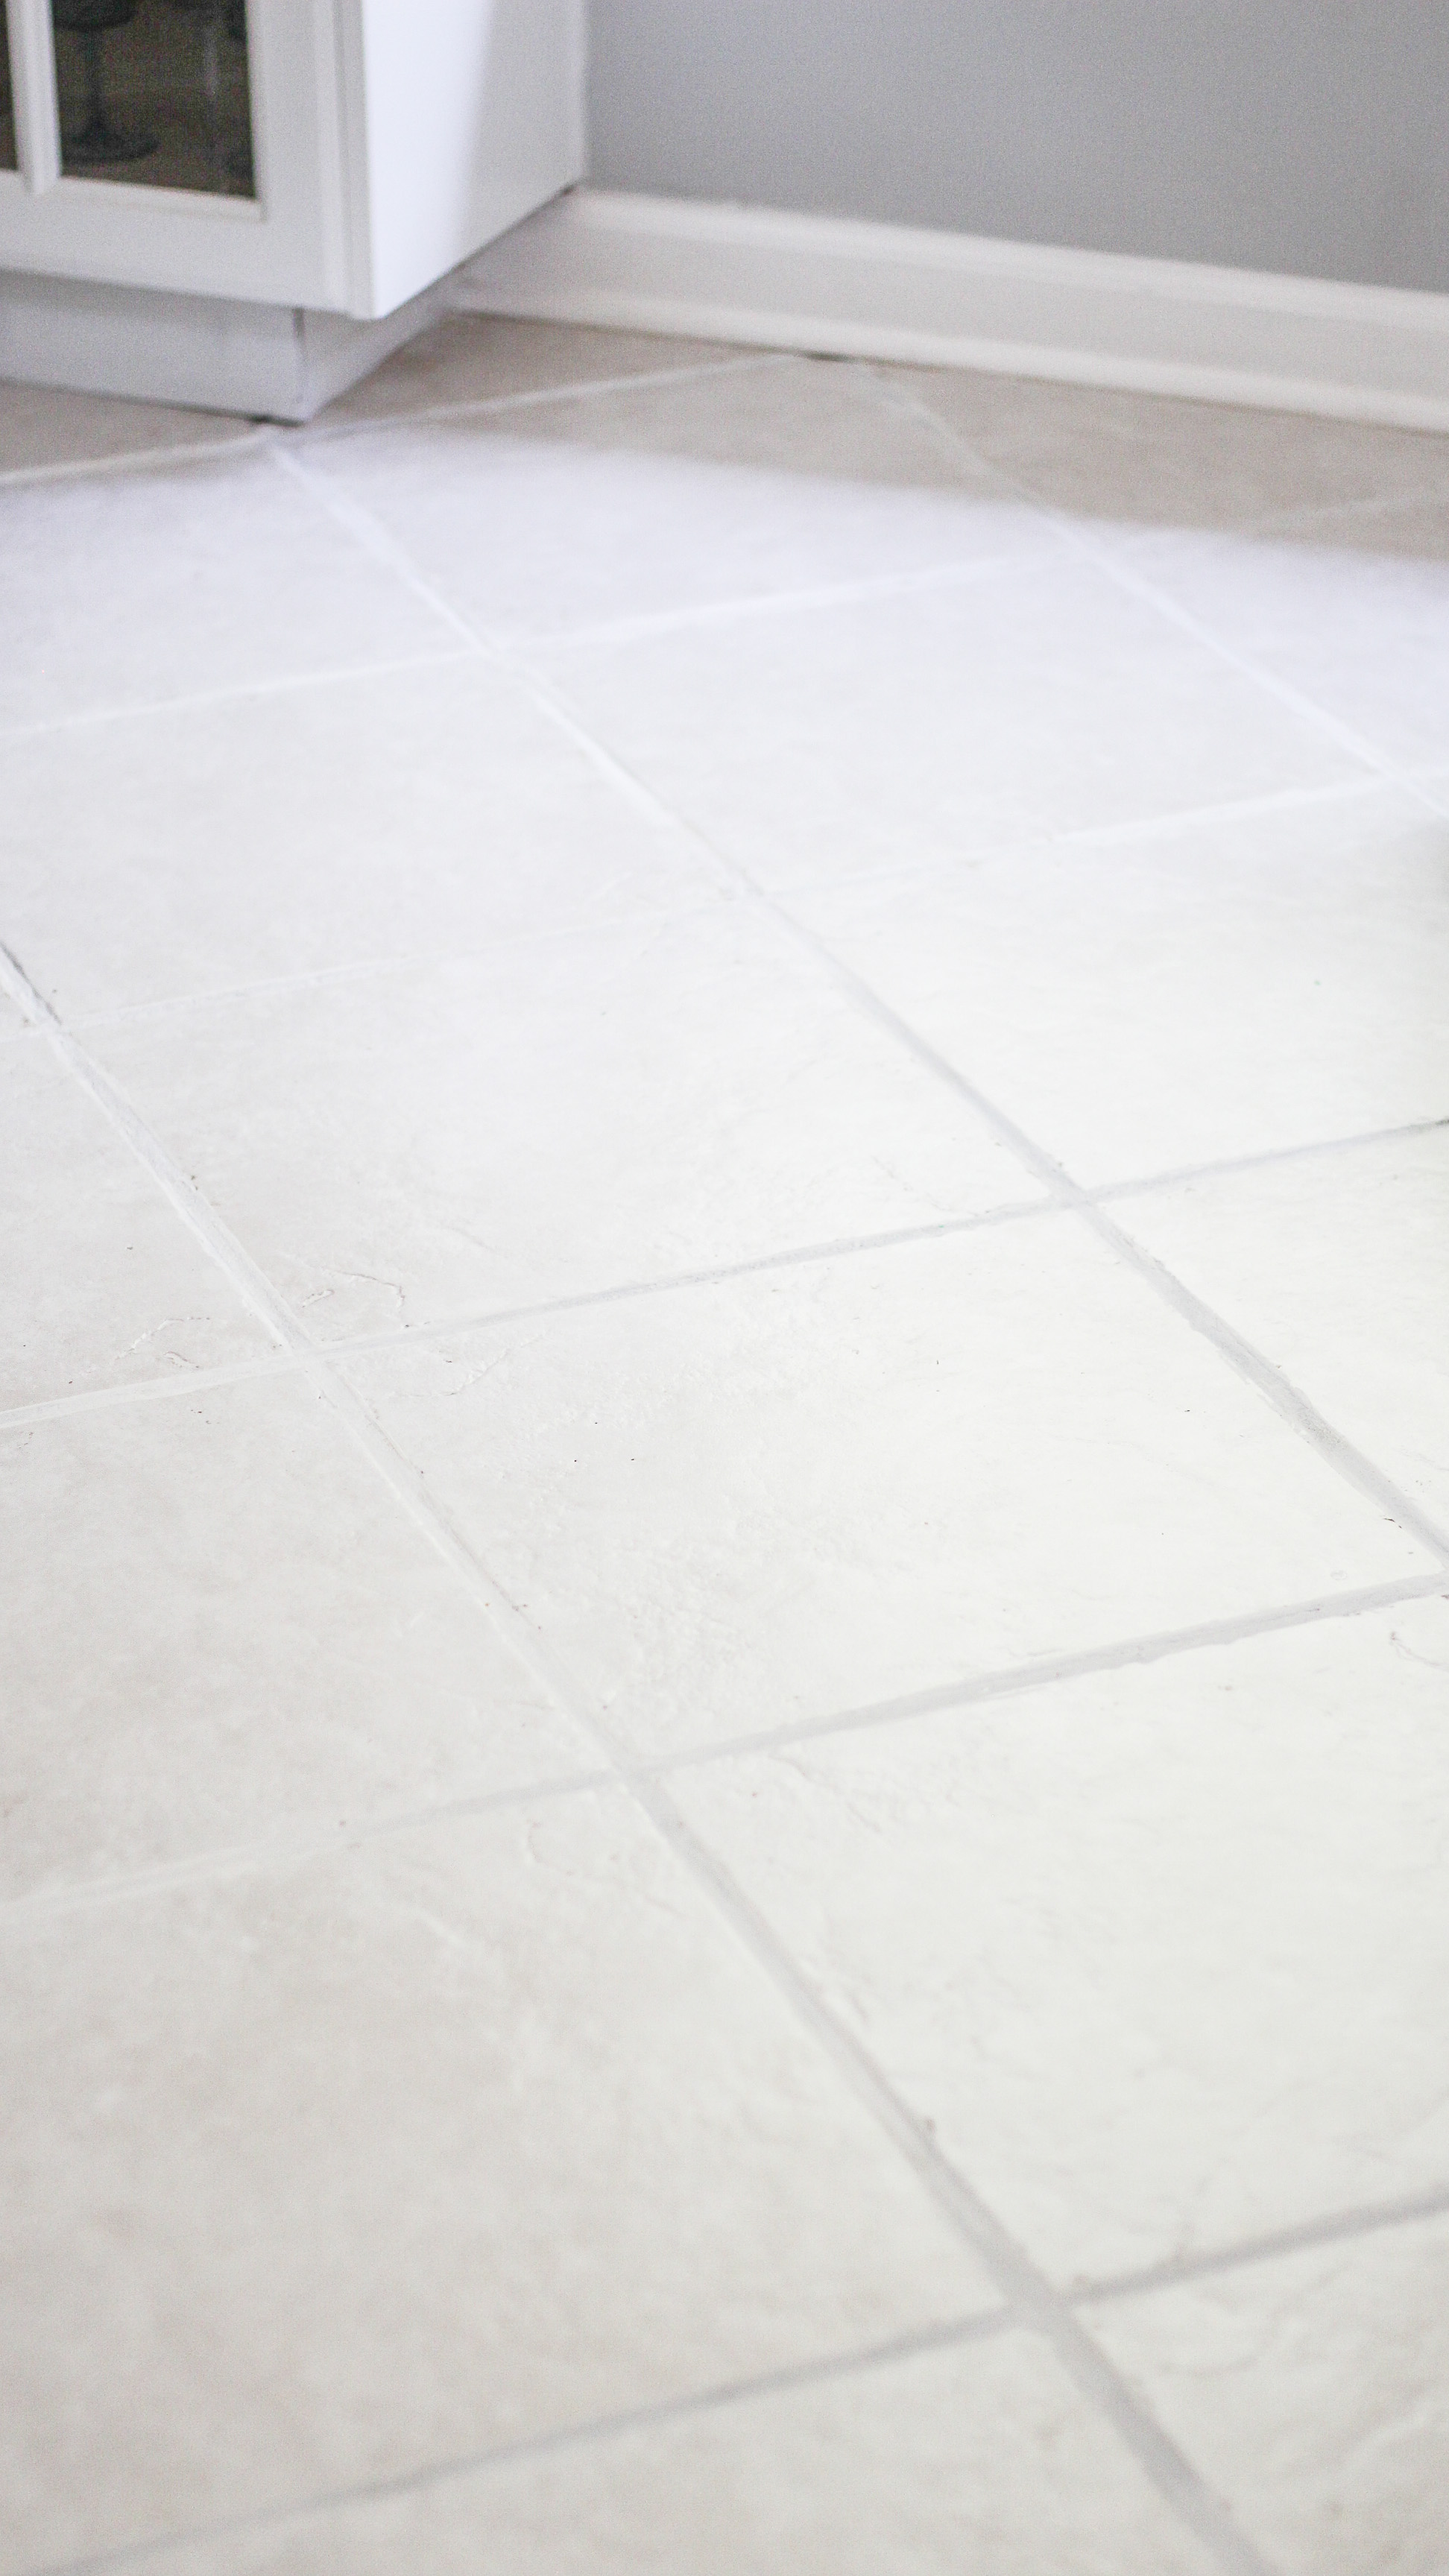 Neglected Tile Flooring, Best Way To Clean Ceramic Tile Floors And Grout